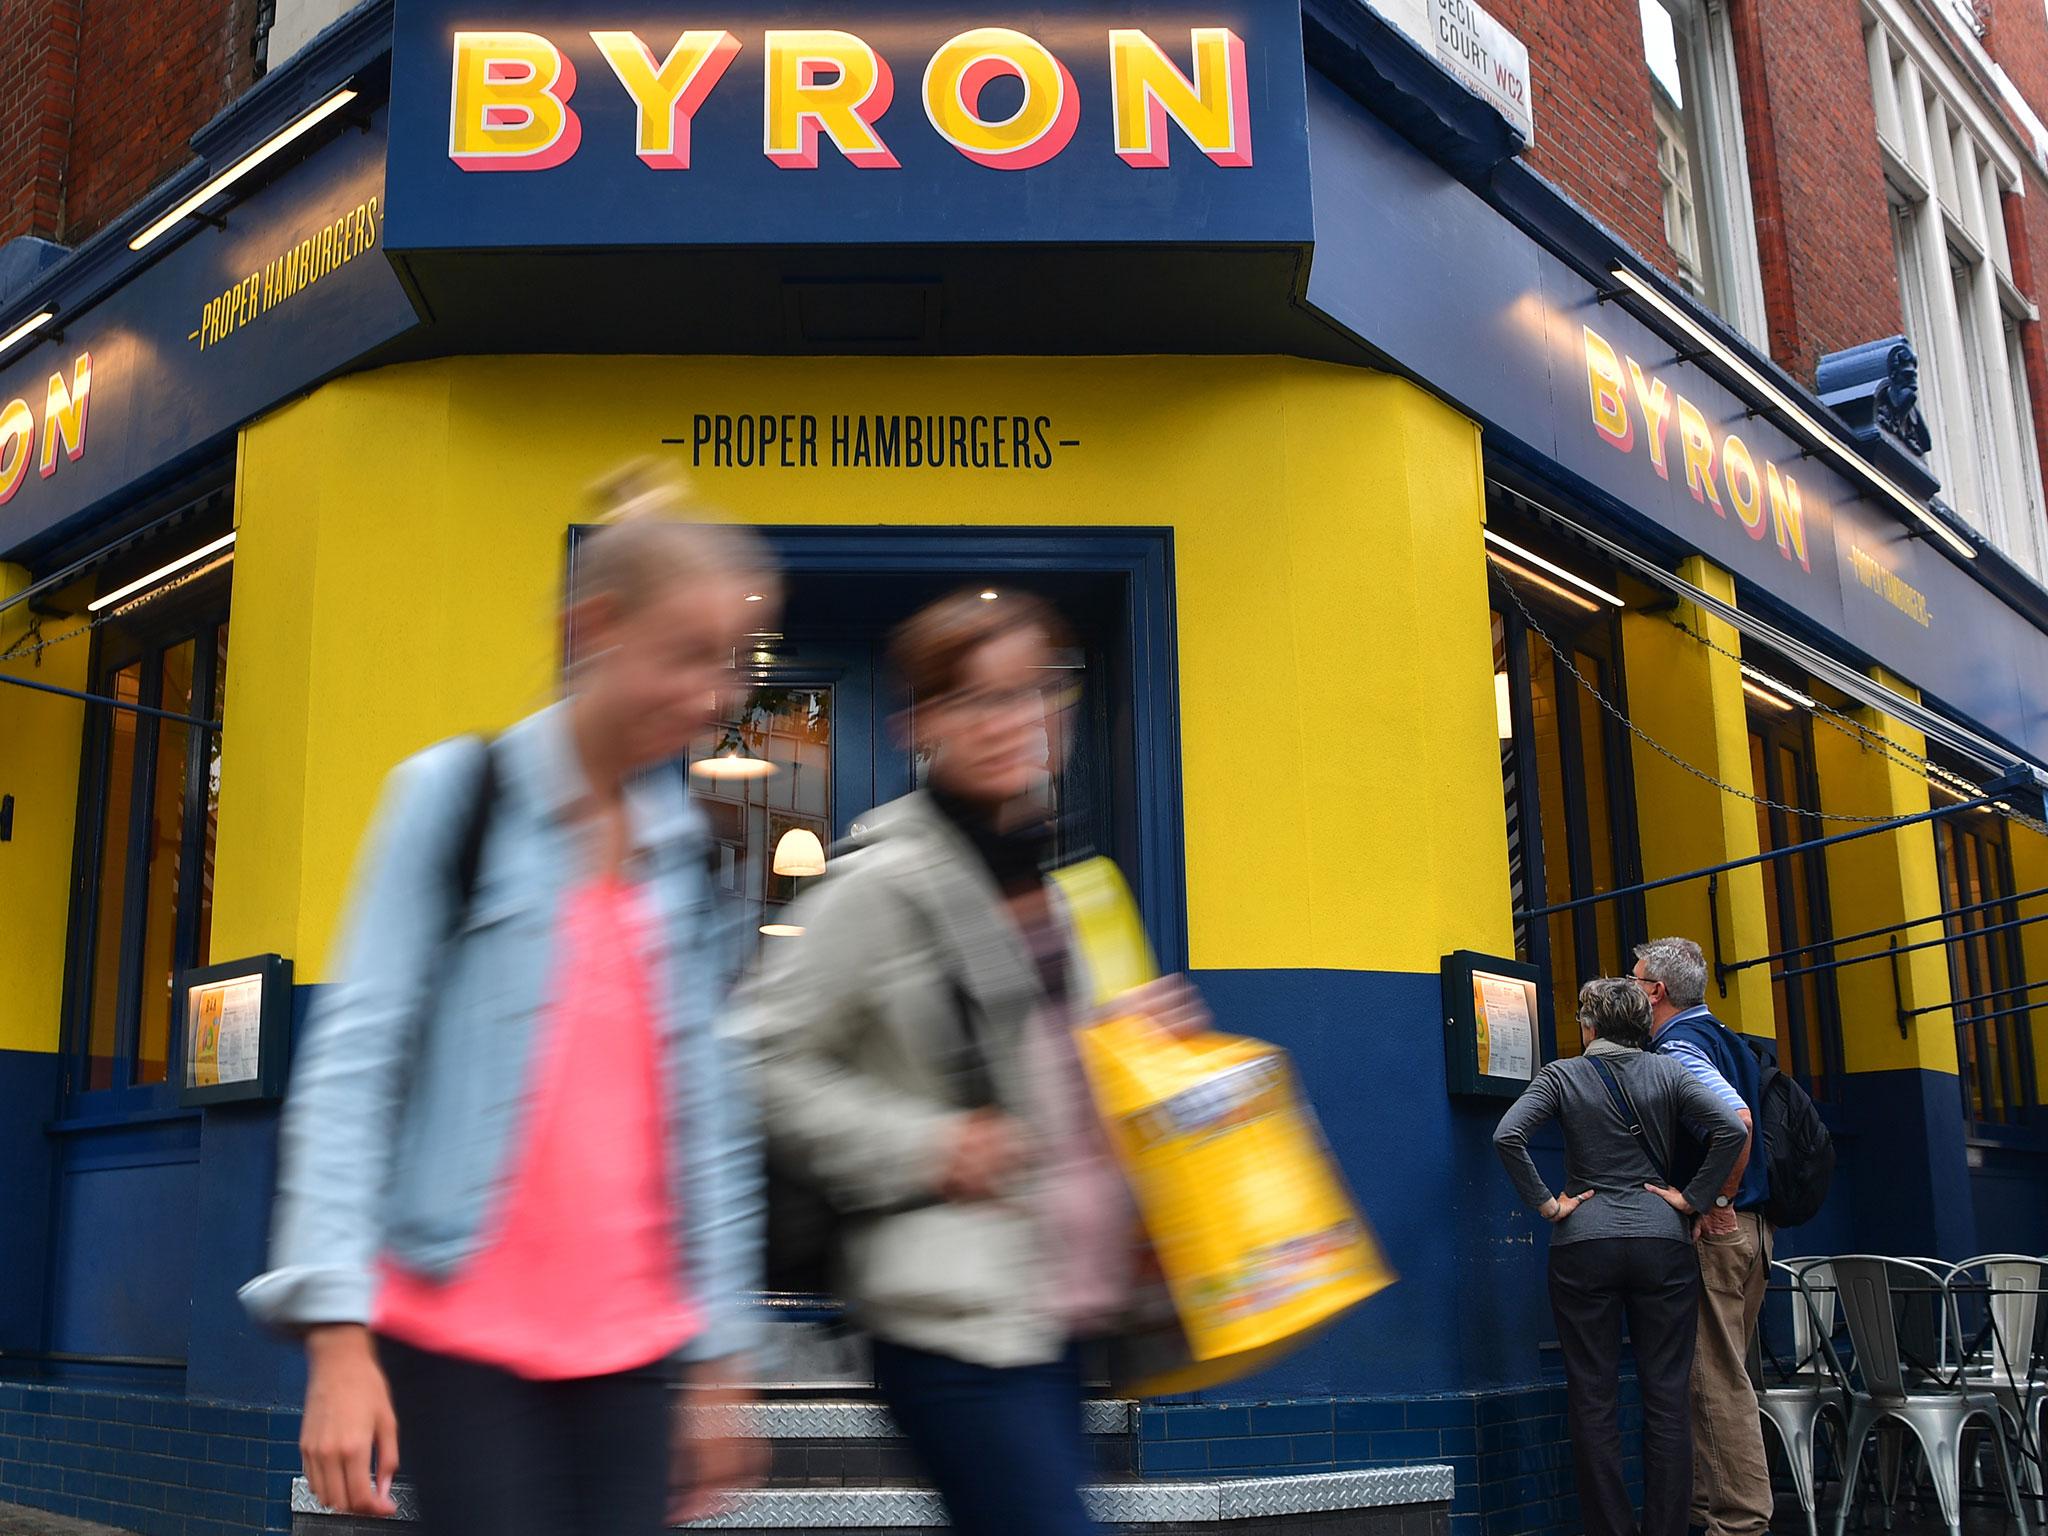 Simon Cope who was named managing director of Byron on Tuesday, said he supports plans for the post-Brexit visas to prevent a staffing crisis